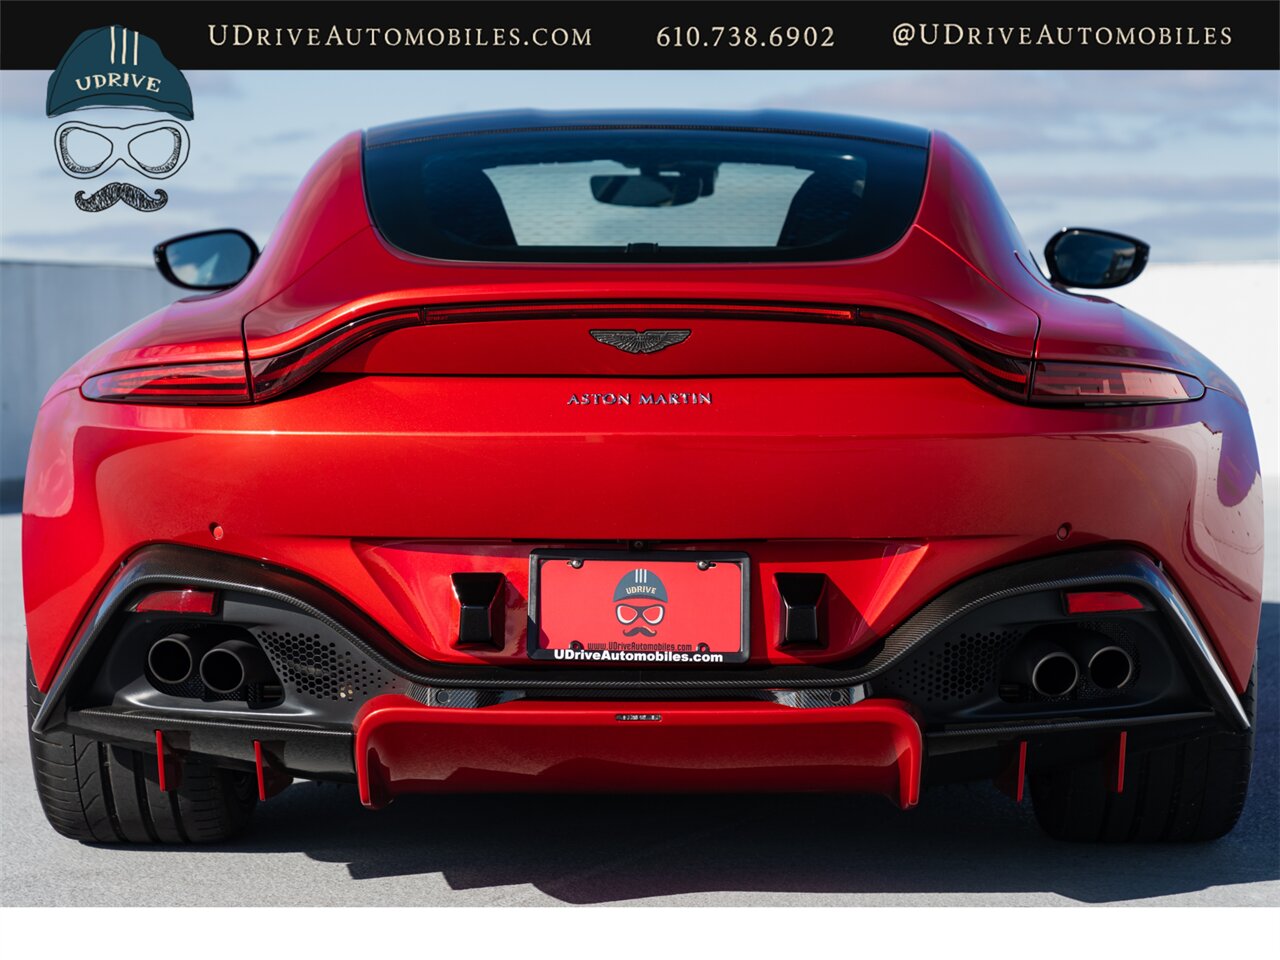 2019 Aston Martin Vantage  Incredibly Spec Rare Q Exclusive Fiamma Red $222k MSRP 1 of a Kind CPO - Photo 24 - West Chester, PA 19382